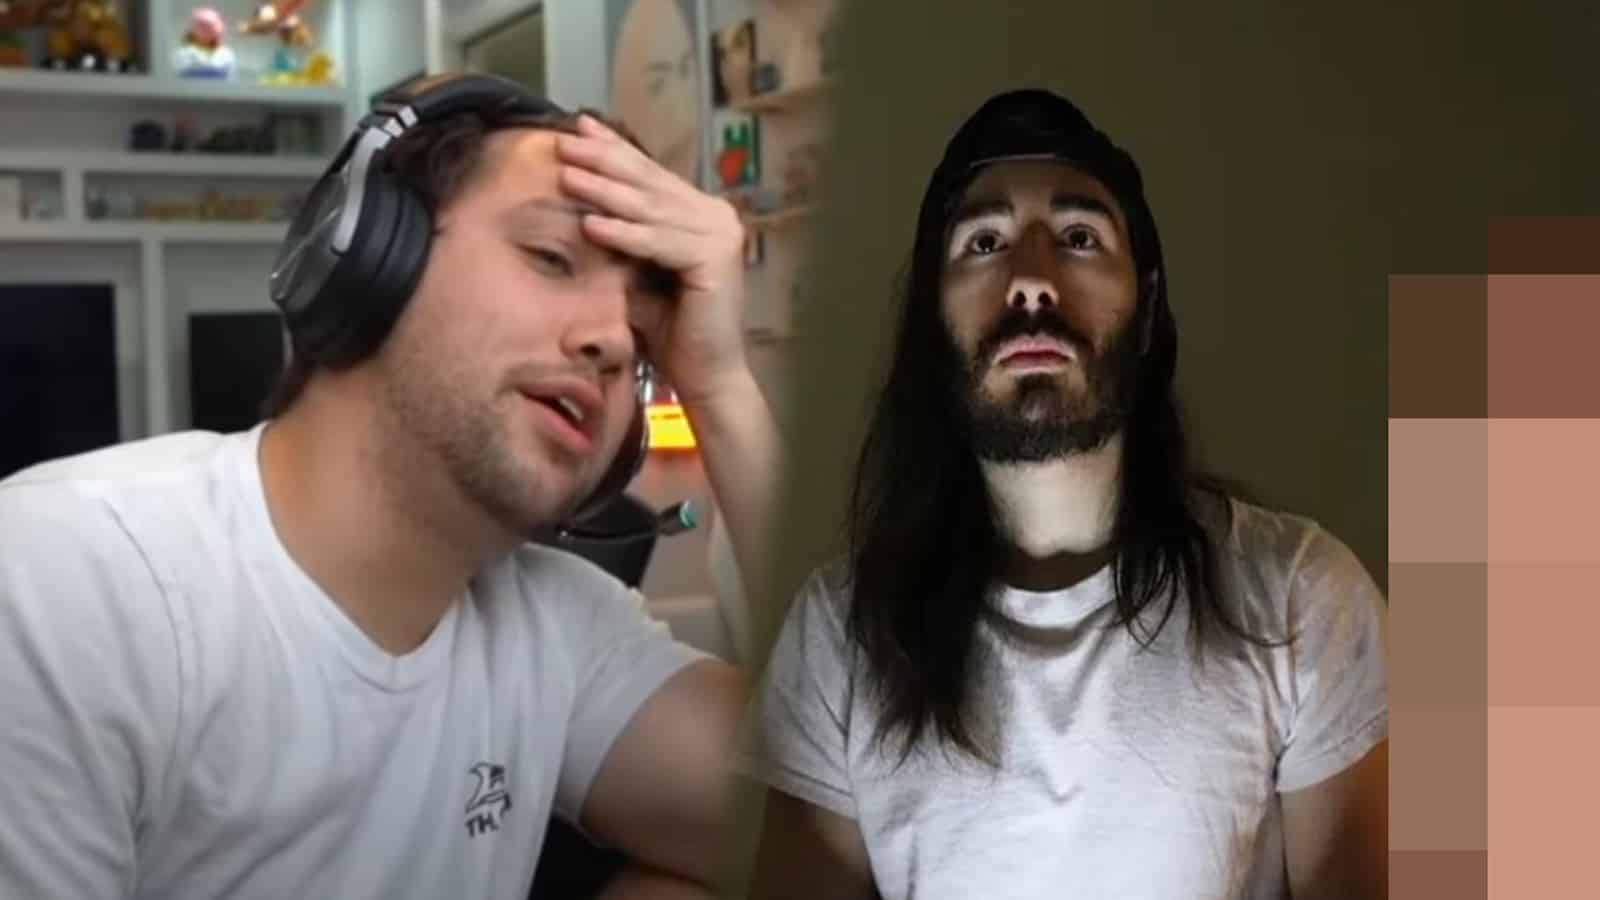 Top 5 Streamers who accidentally did a face reveal